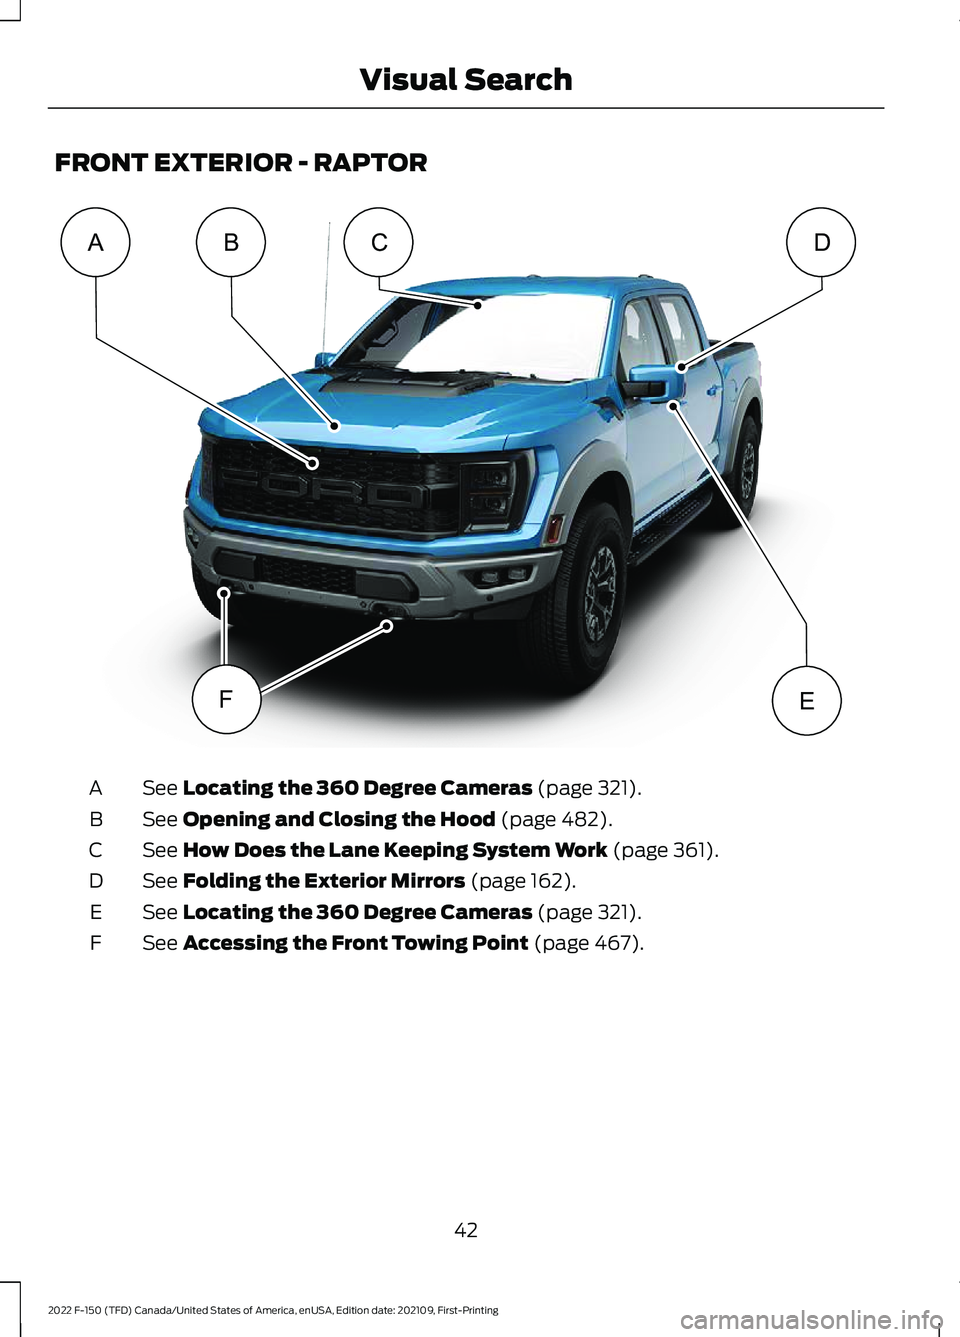 FORD F-150 2022  Owners Manual FRONT EXTERIOR - RAPTOR
See Locating the 360 Degree Cameras (page 321).
A
See 
Opening and Closing the Hood (page 482).
B
See 
How Does the Lane Keeping System Work (page 361).
C
See 
Folding the Exte